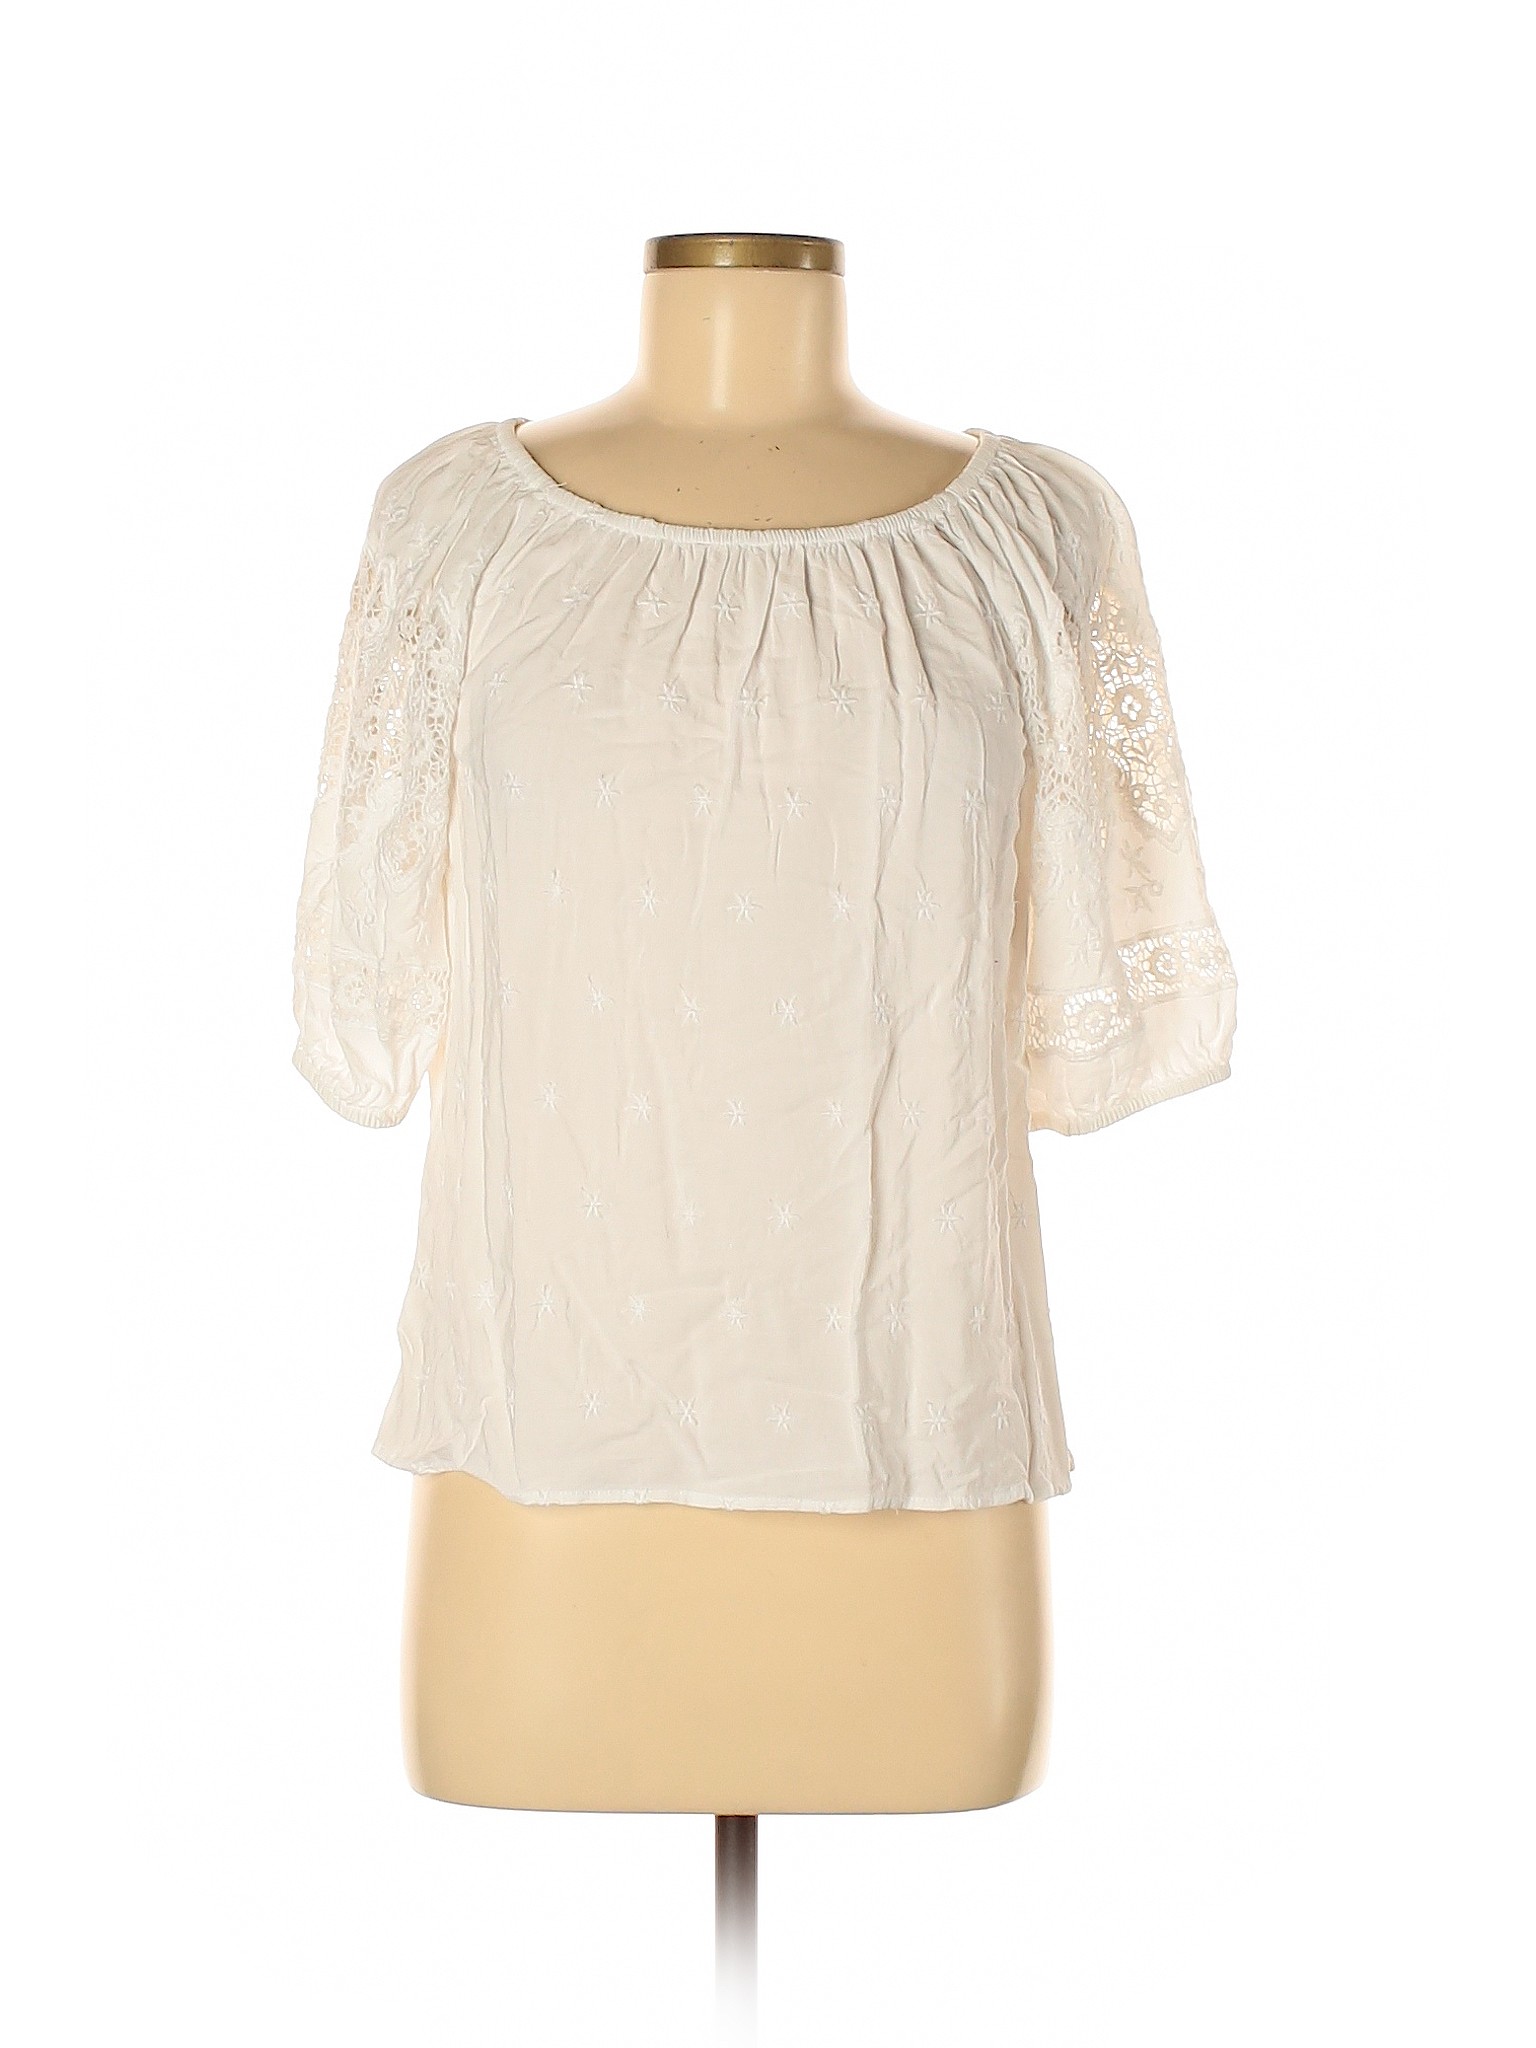 Ann Taylor LOFT 100% Viscose Solid Ivory White 3/4 Sleeve Blouse Size M ...